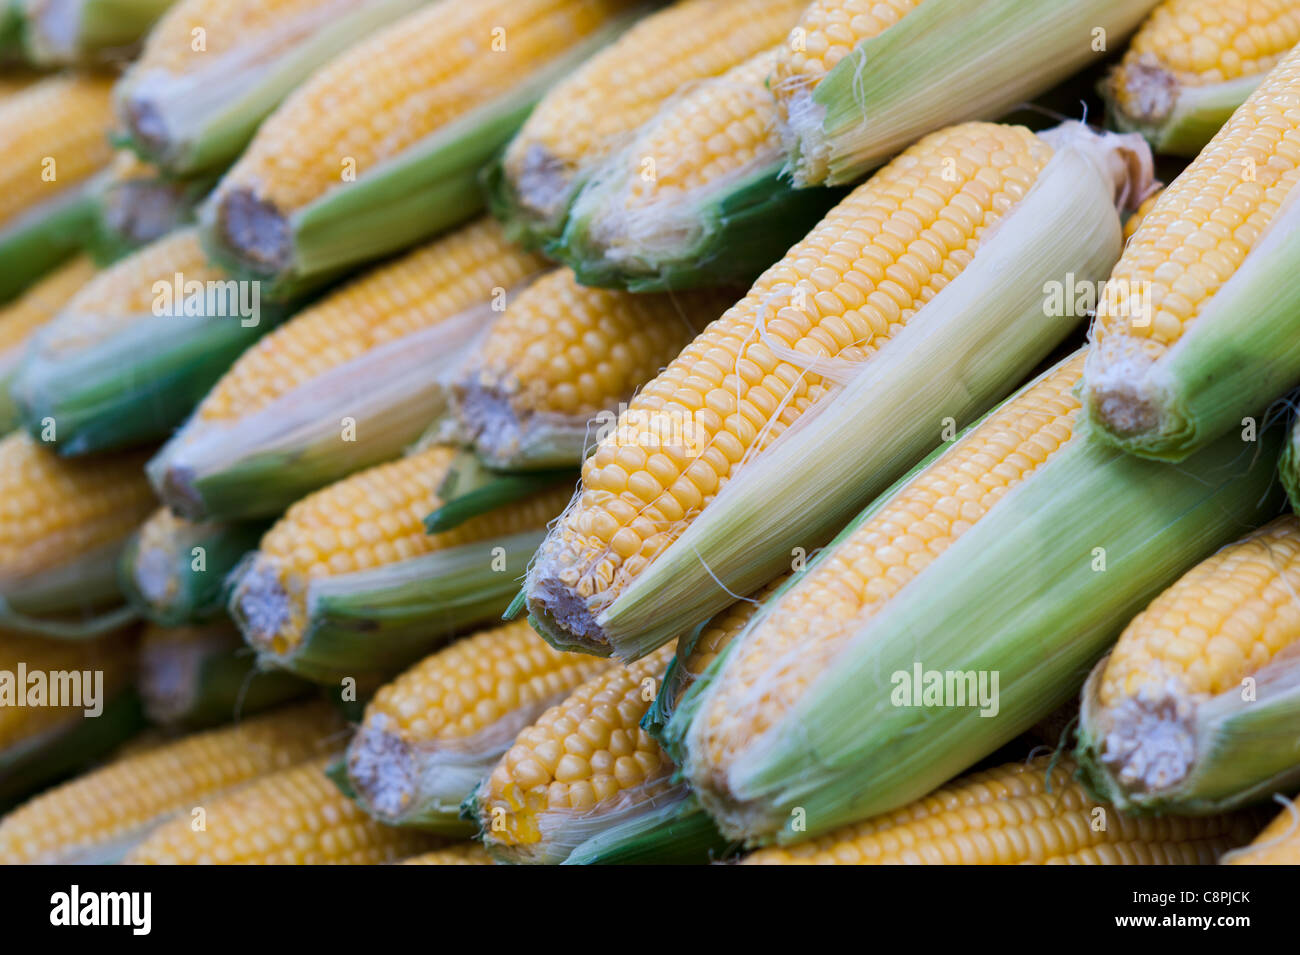 Corn in a food stand in the market. Stock Photo